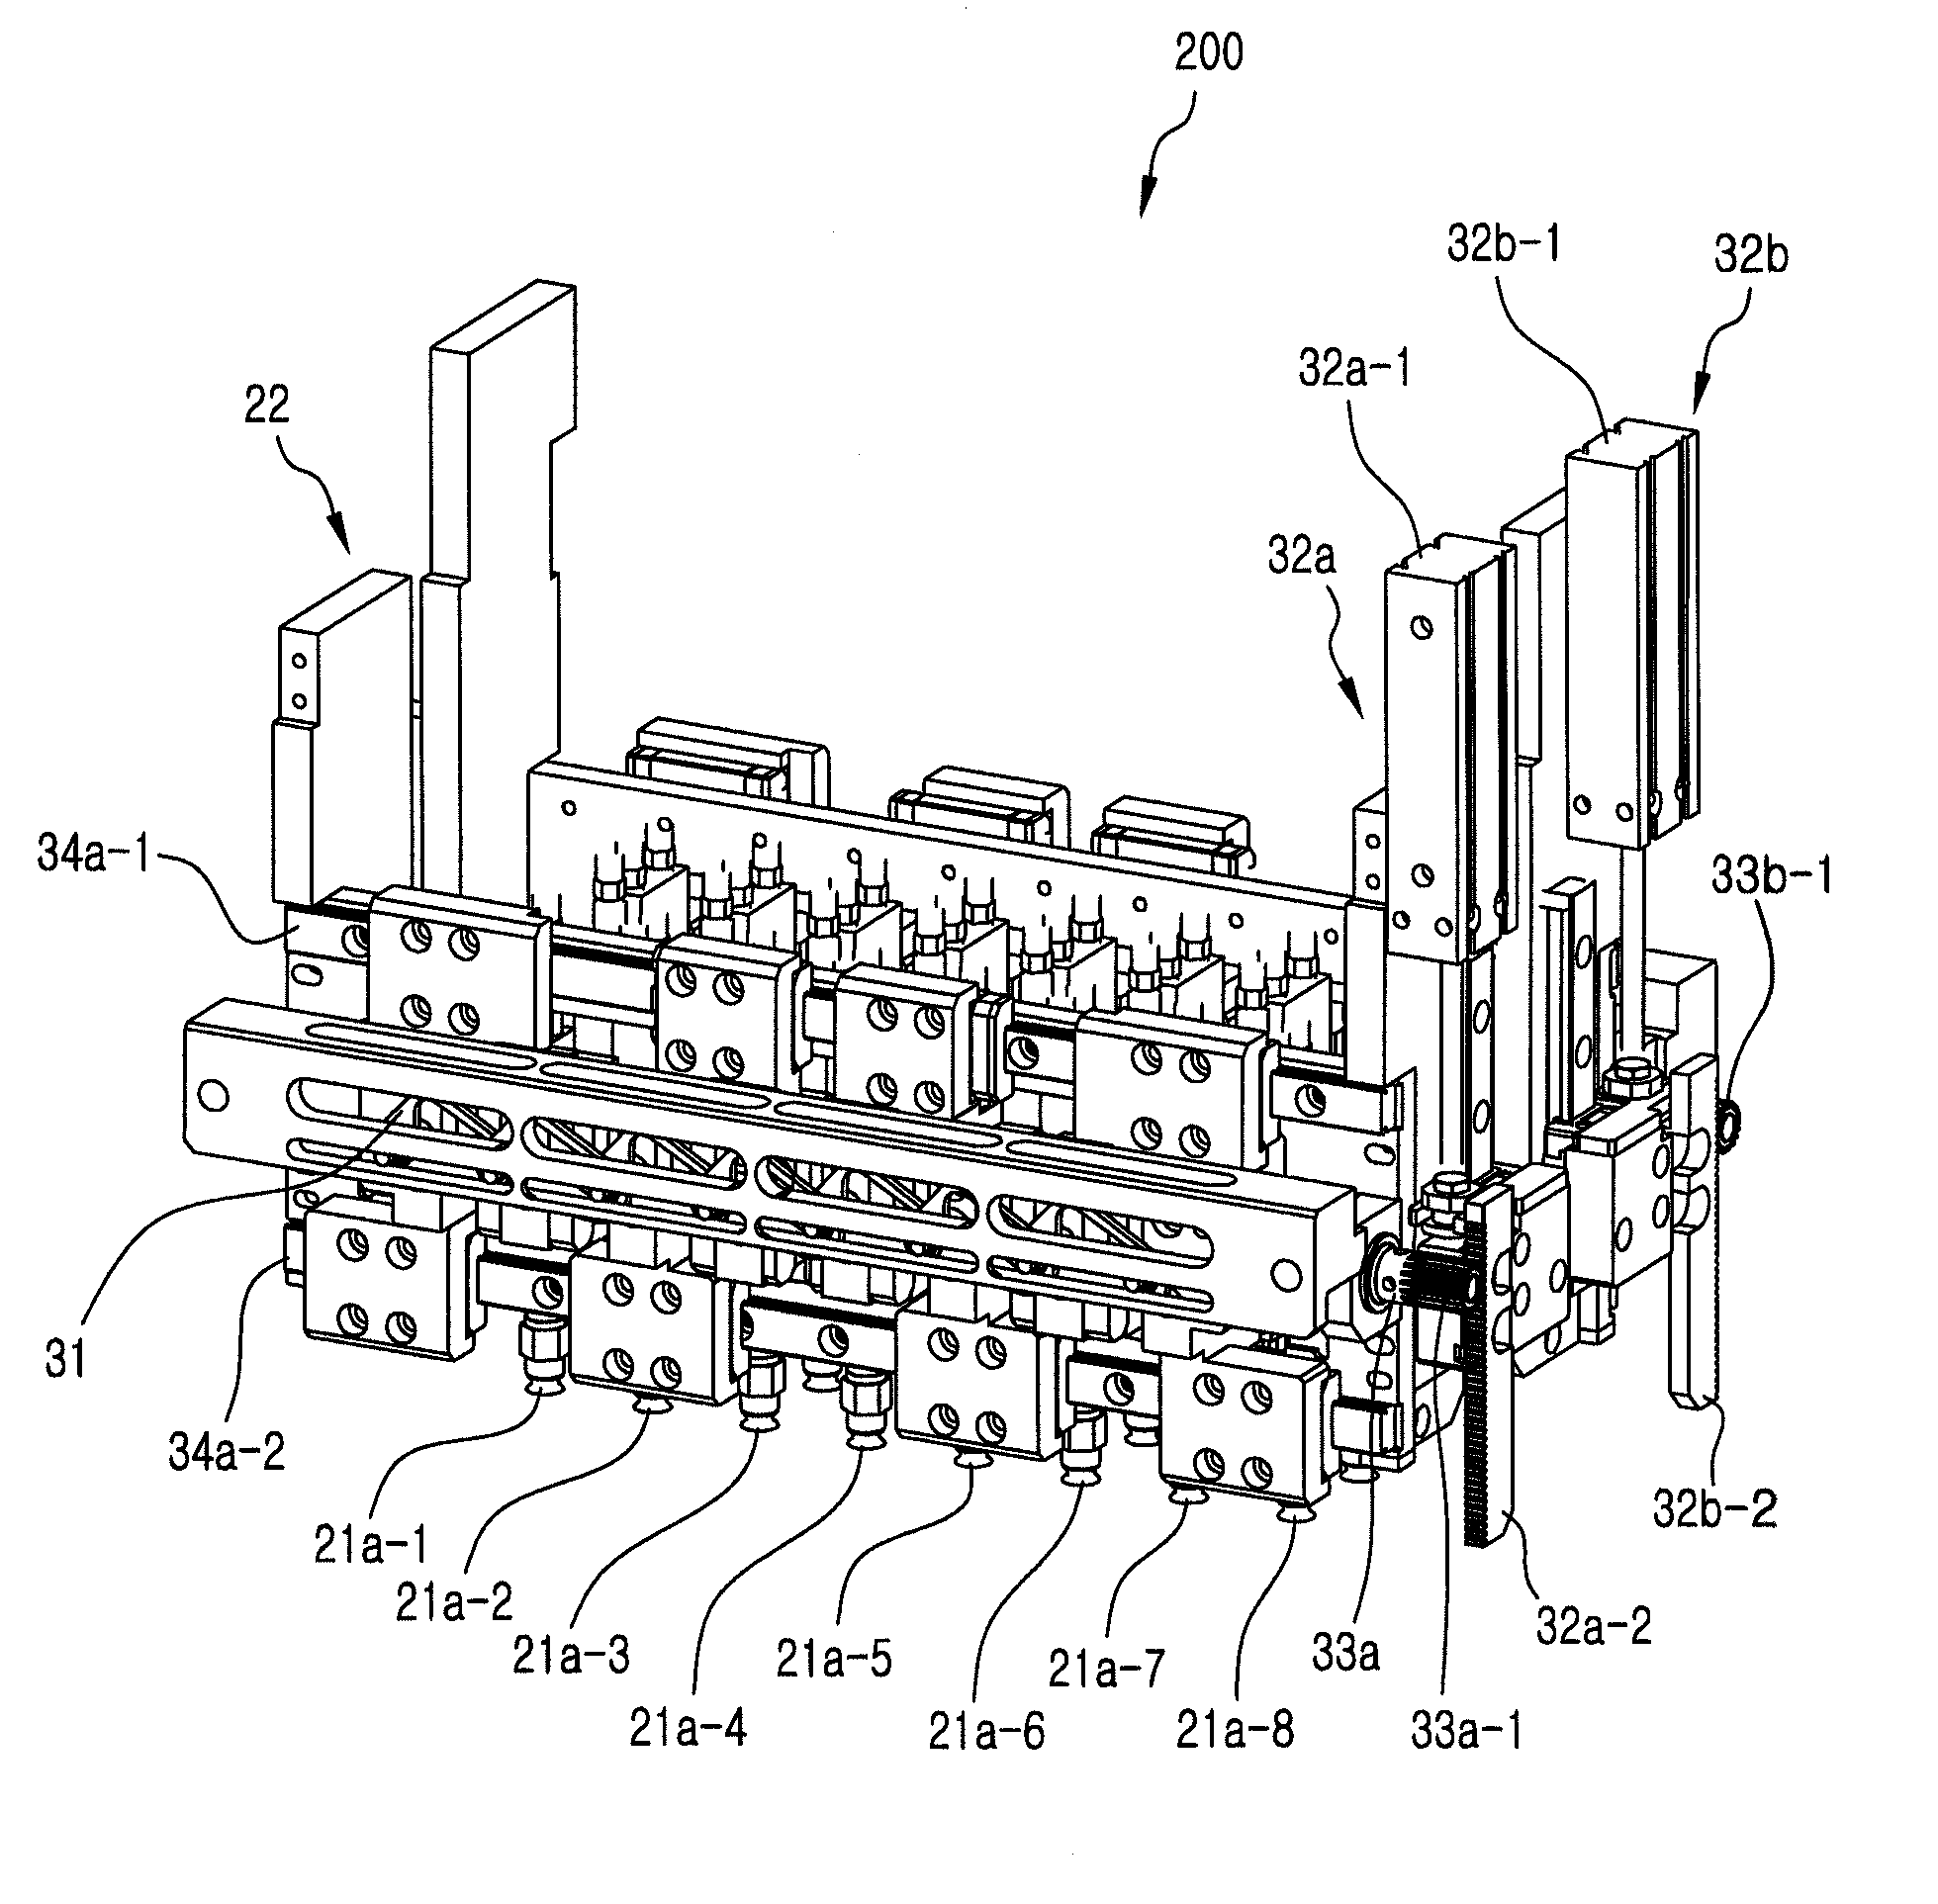 Pick and place apparatus